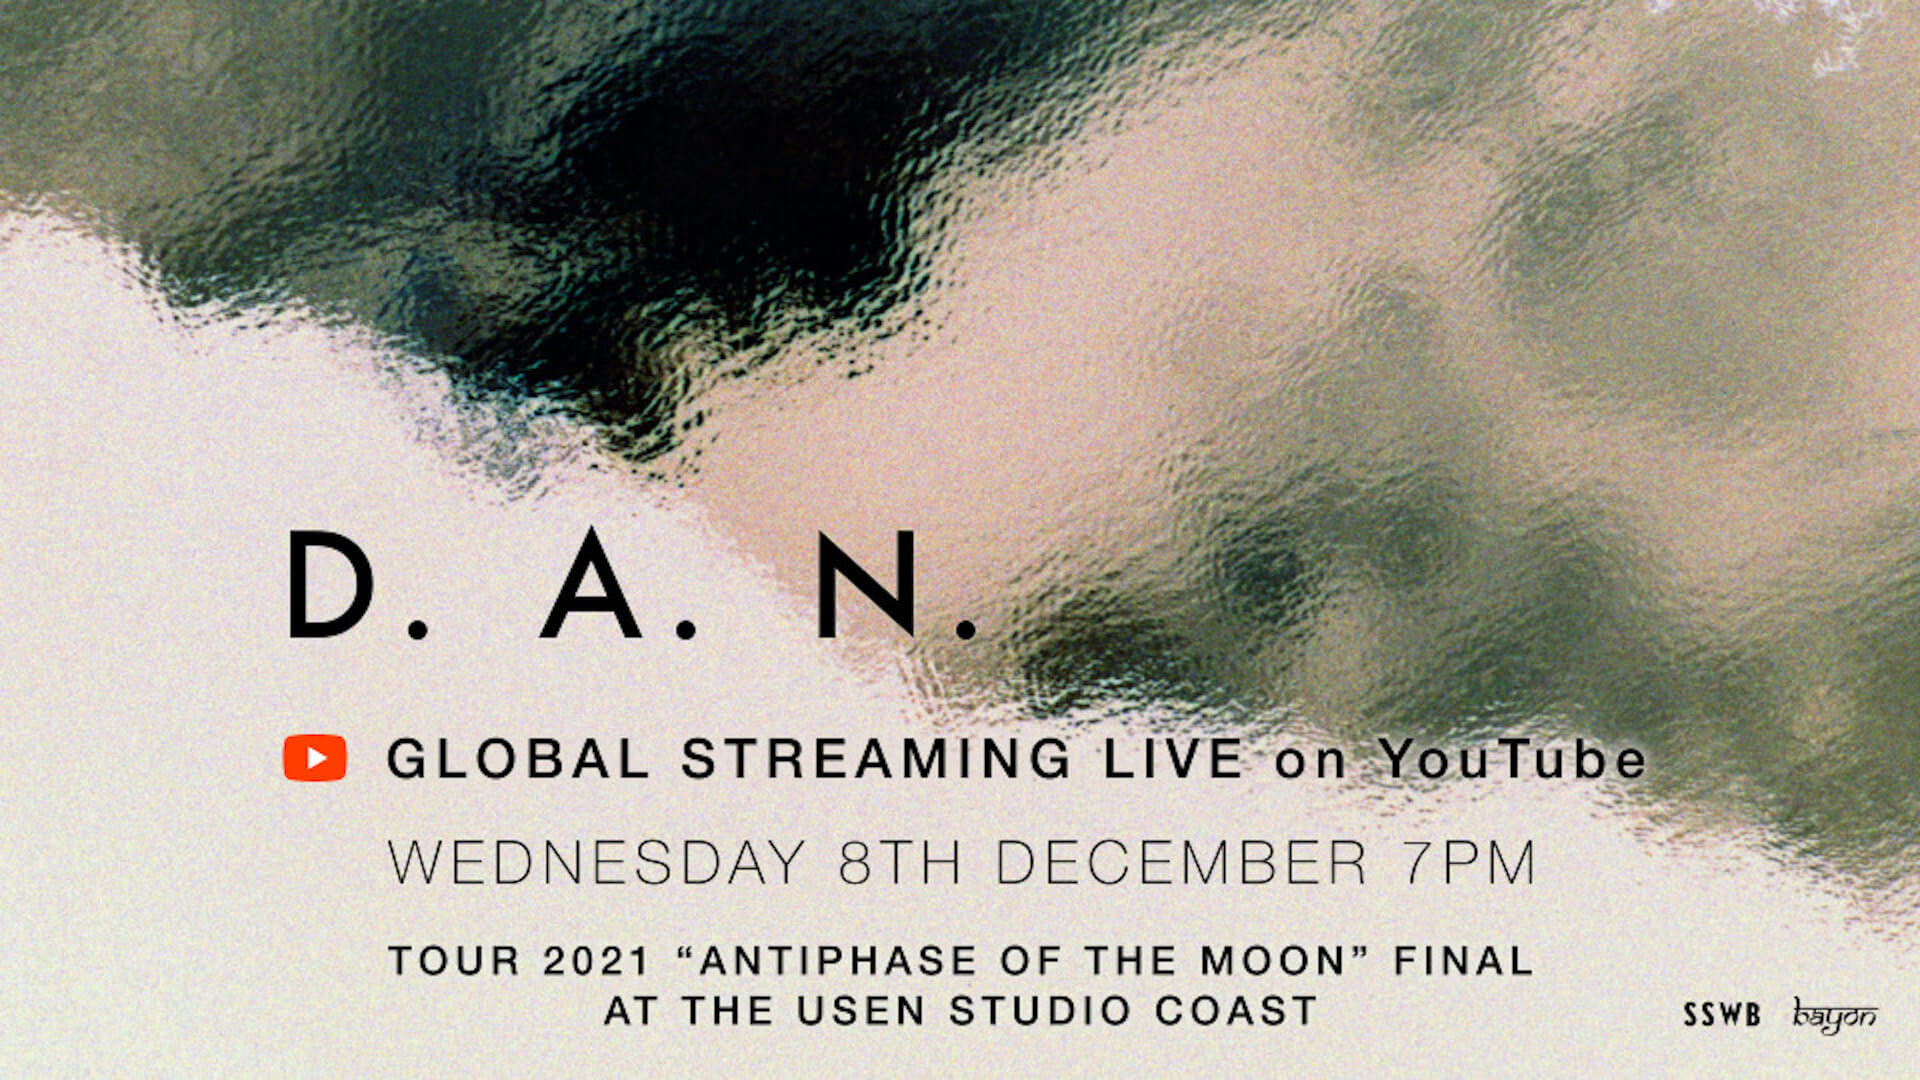 D.A.N.のニューアルバム『NO MOON』のリリースツアー＜ANTIPHASE OF THE MOON＞のファイナル東京公演が配信決定！ music_211207dan_01